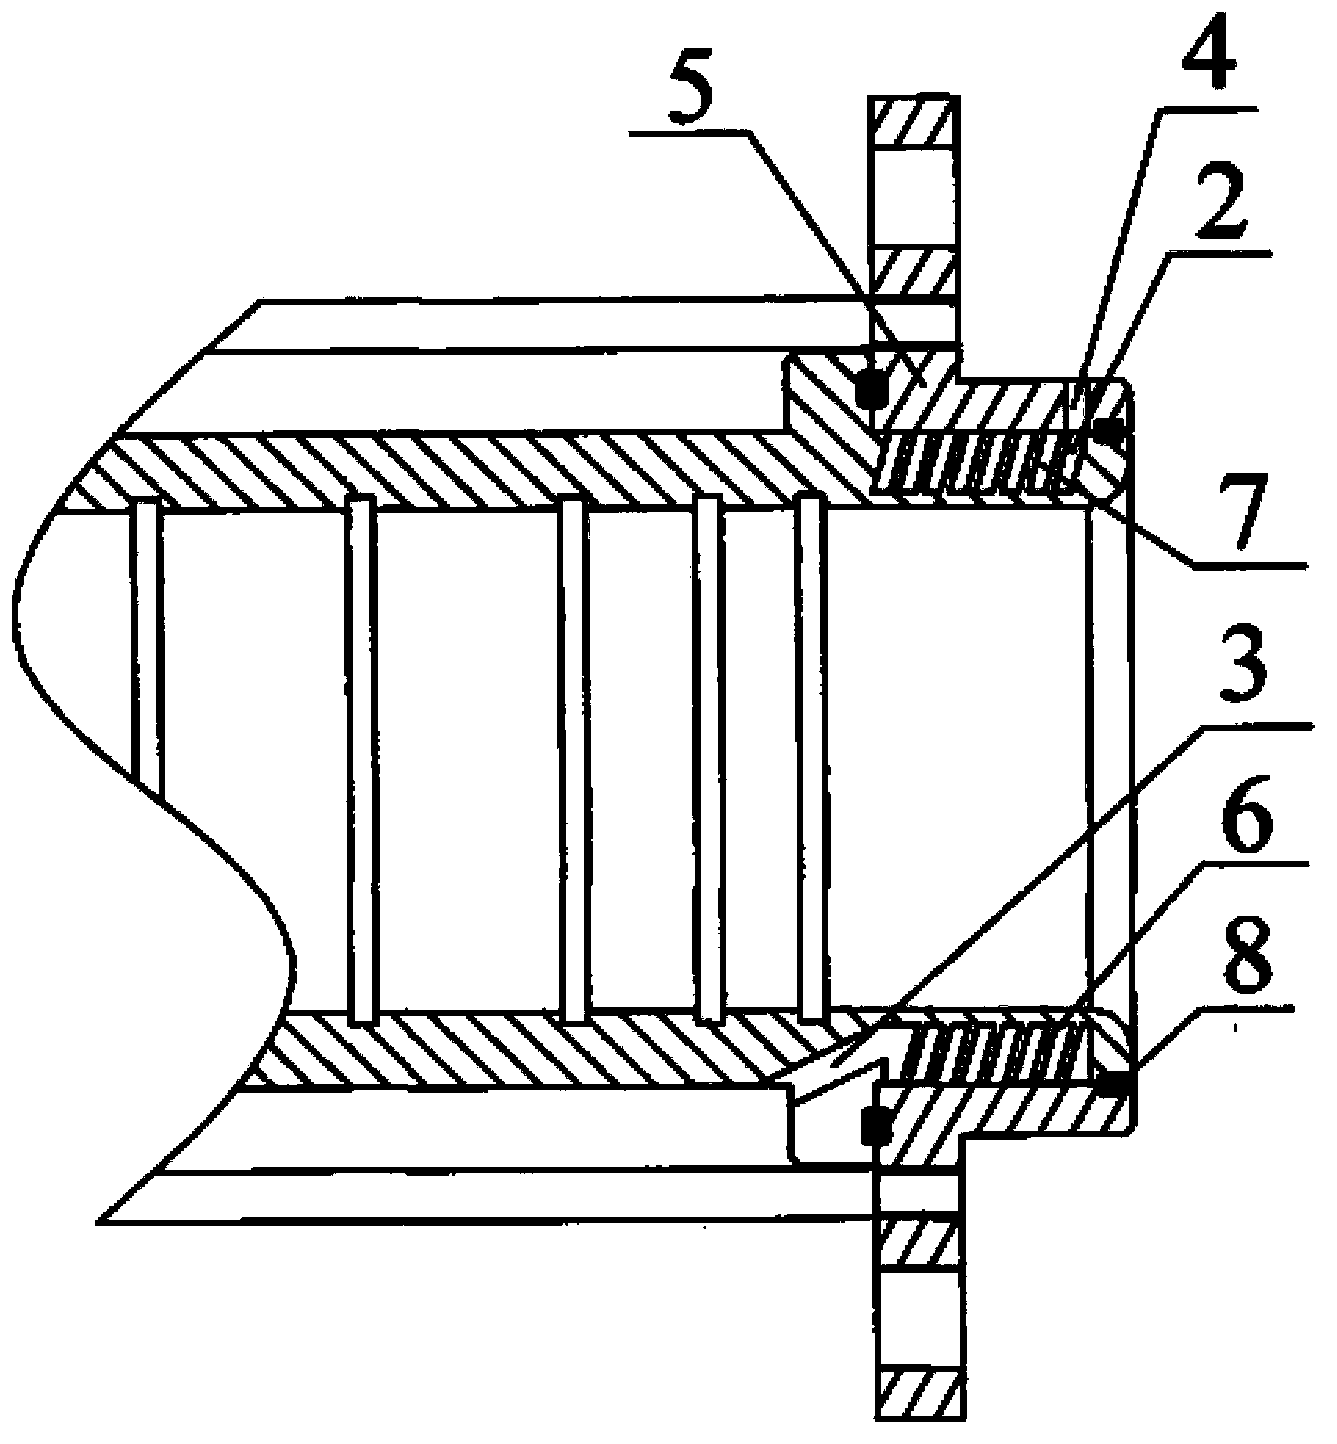 Pipe sizing sleeve device